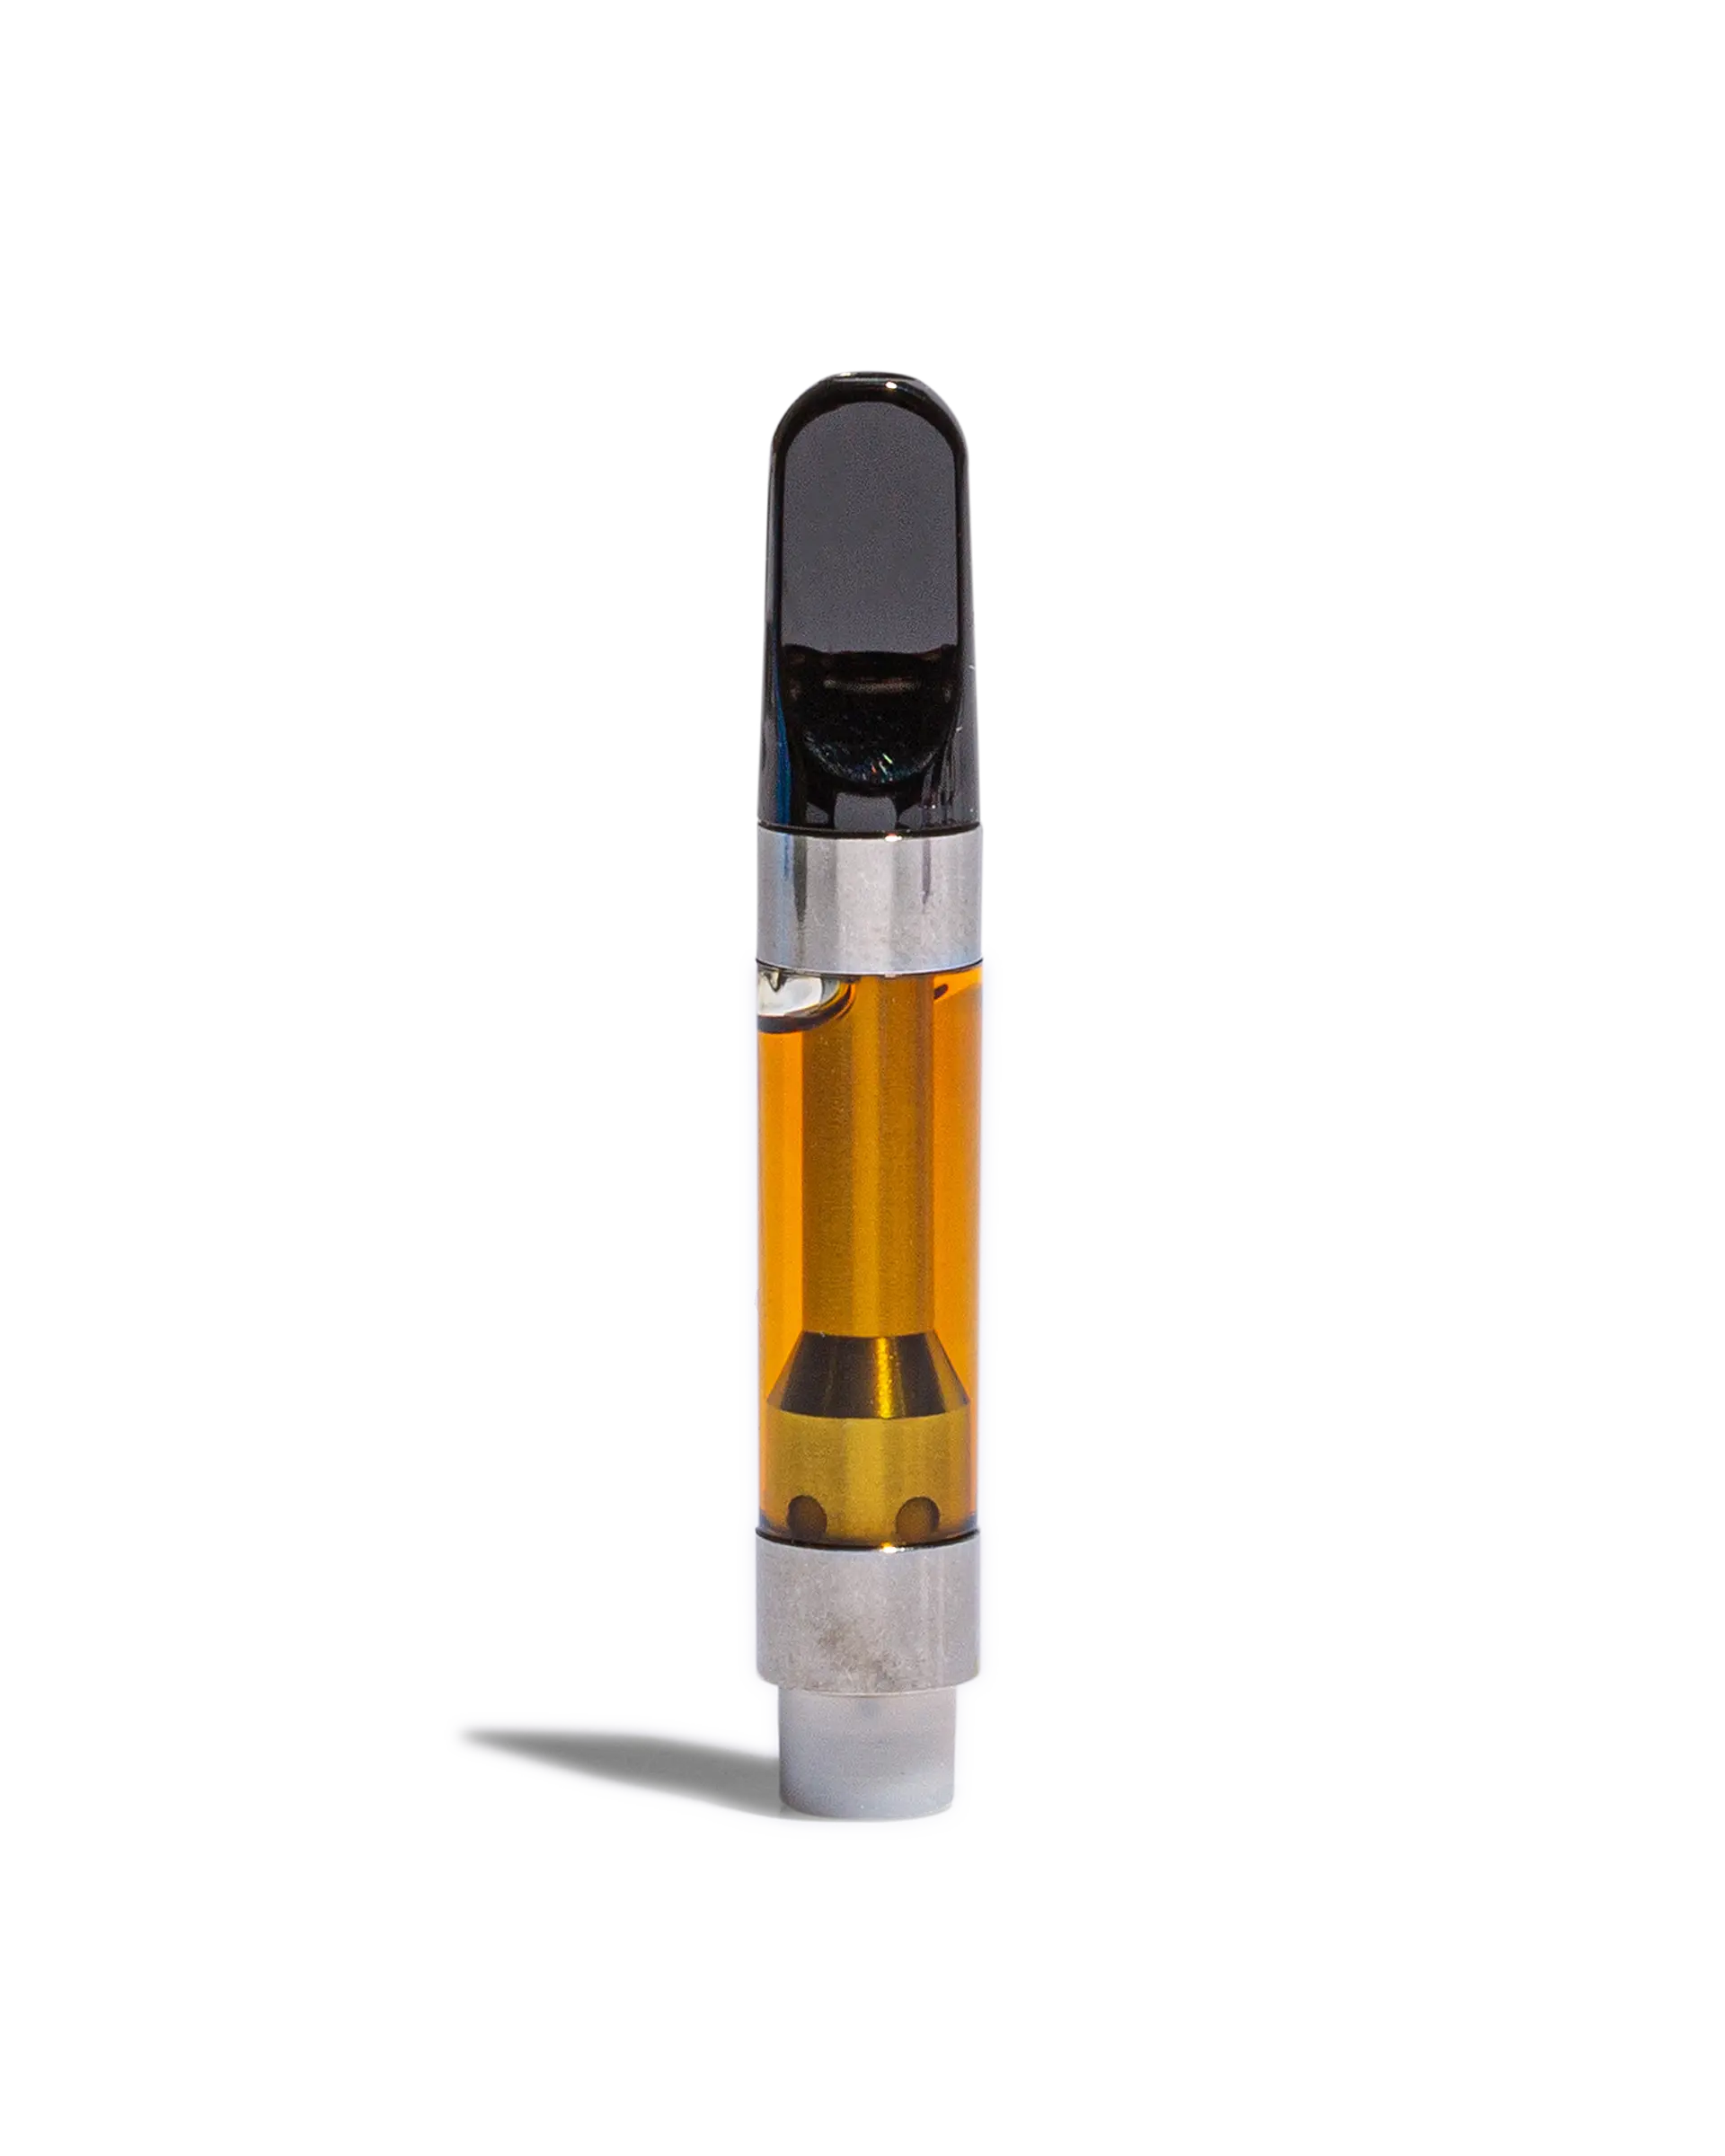 Duct Tape Live Resin Cart 1g